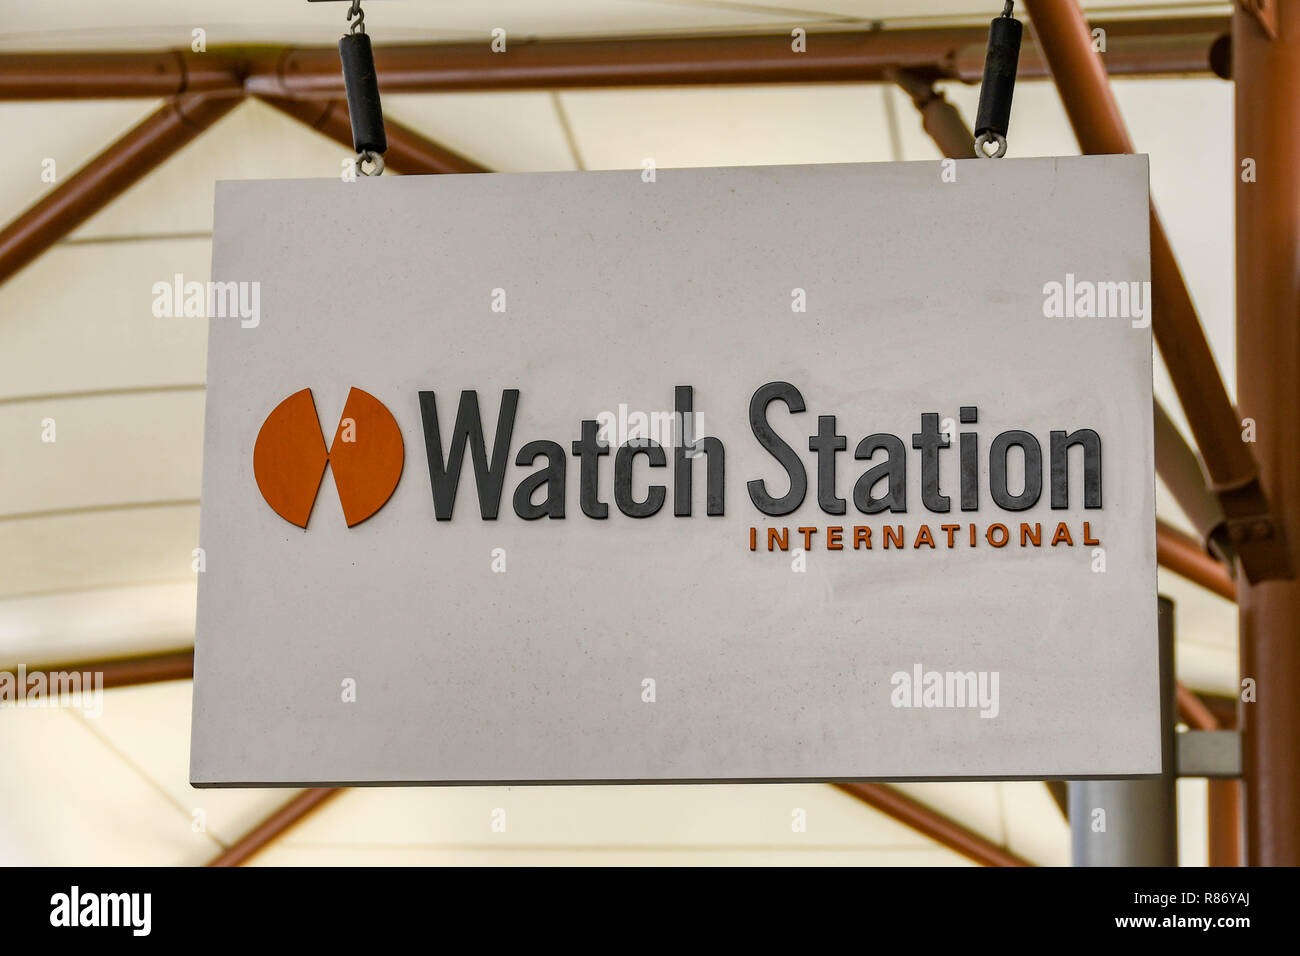 SEATTLE, WA, USA - JUNE 2018: Close up view of a sign outside the Watch Station store at the Premium Outlets shopping mall in Tulalip near Seattle. Stock Photo